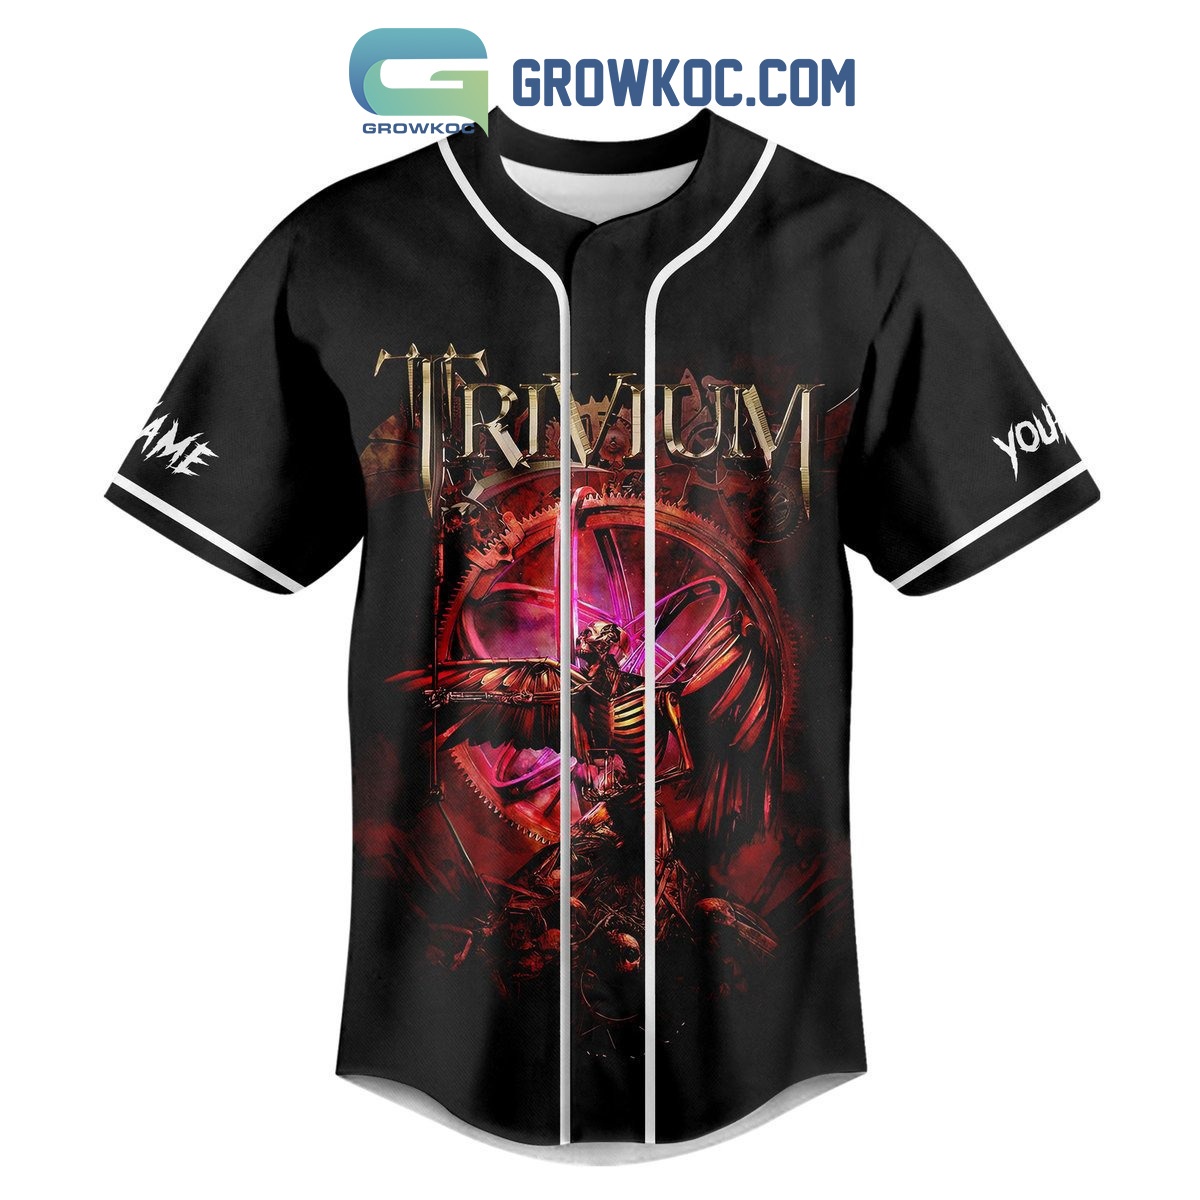 Trivium Until The World Goes Cold This Battles Burned All That I've Known Personalized Baseball Jersey